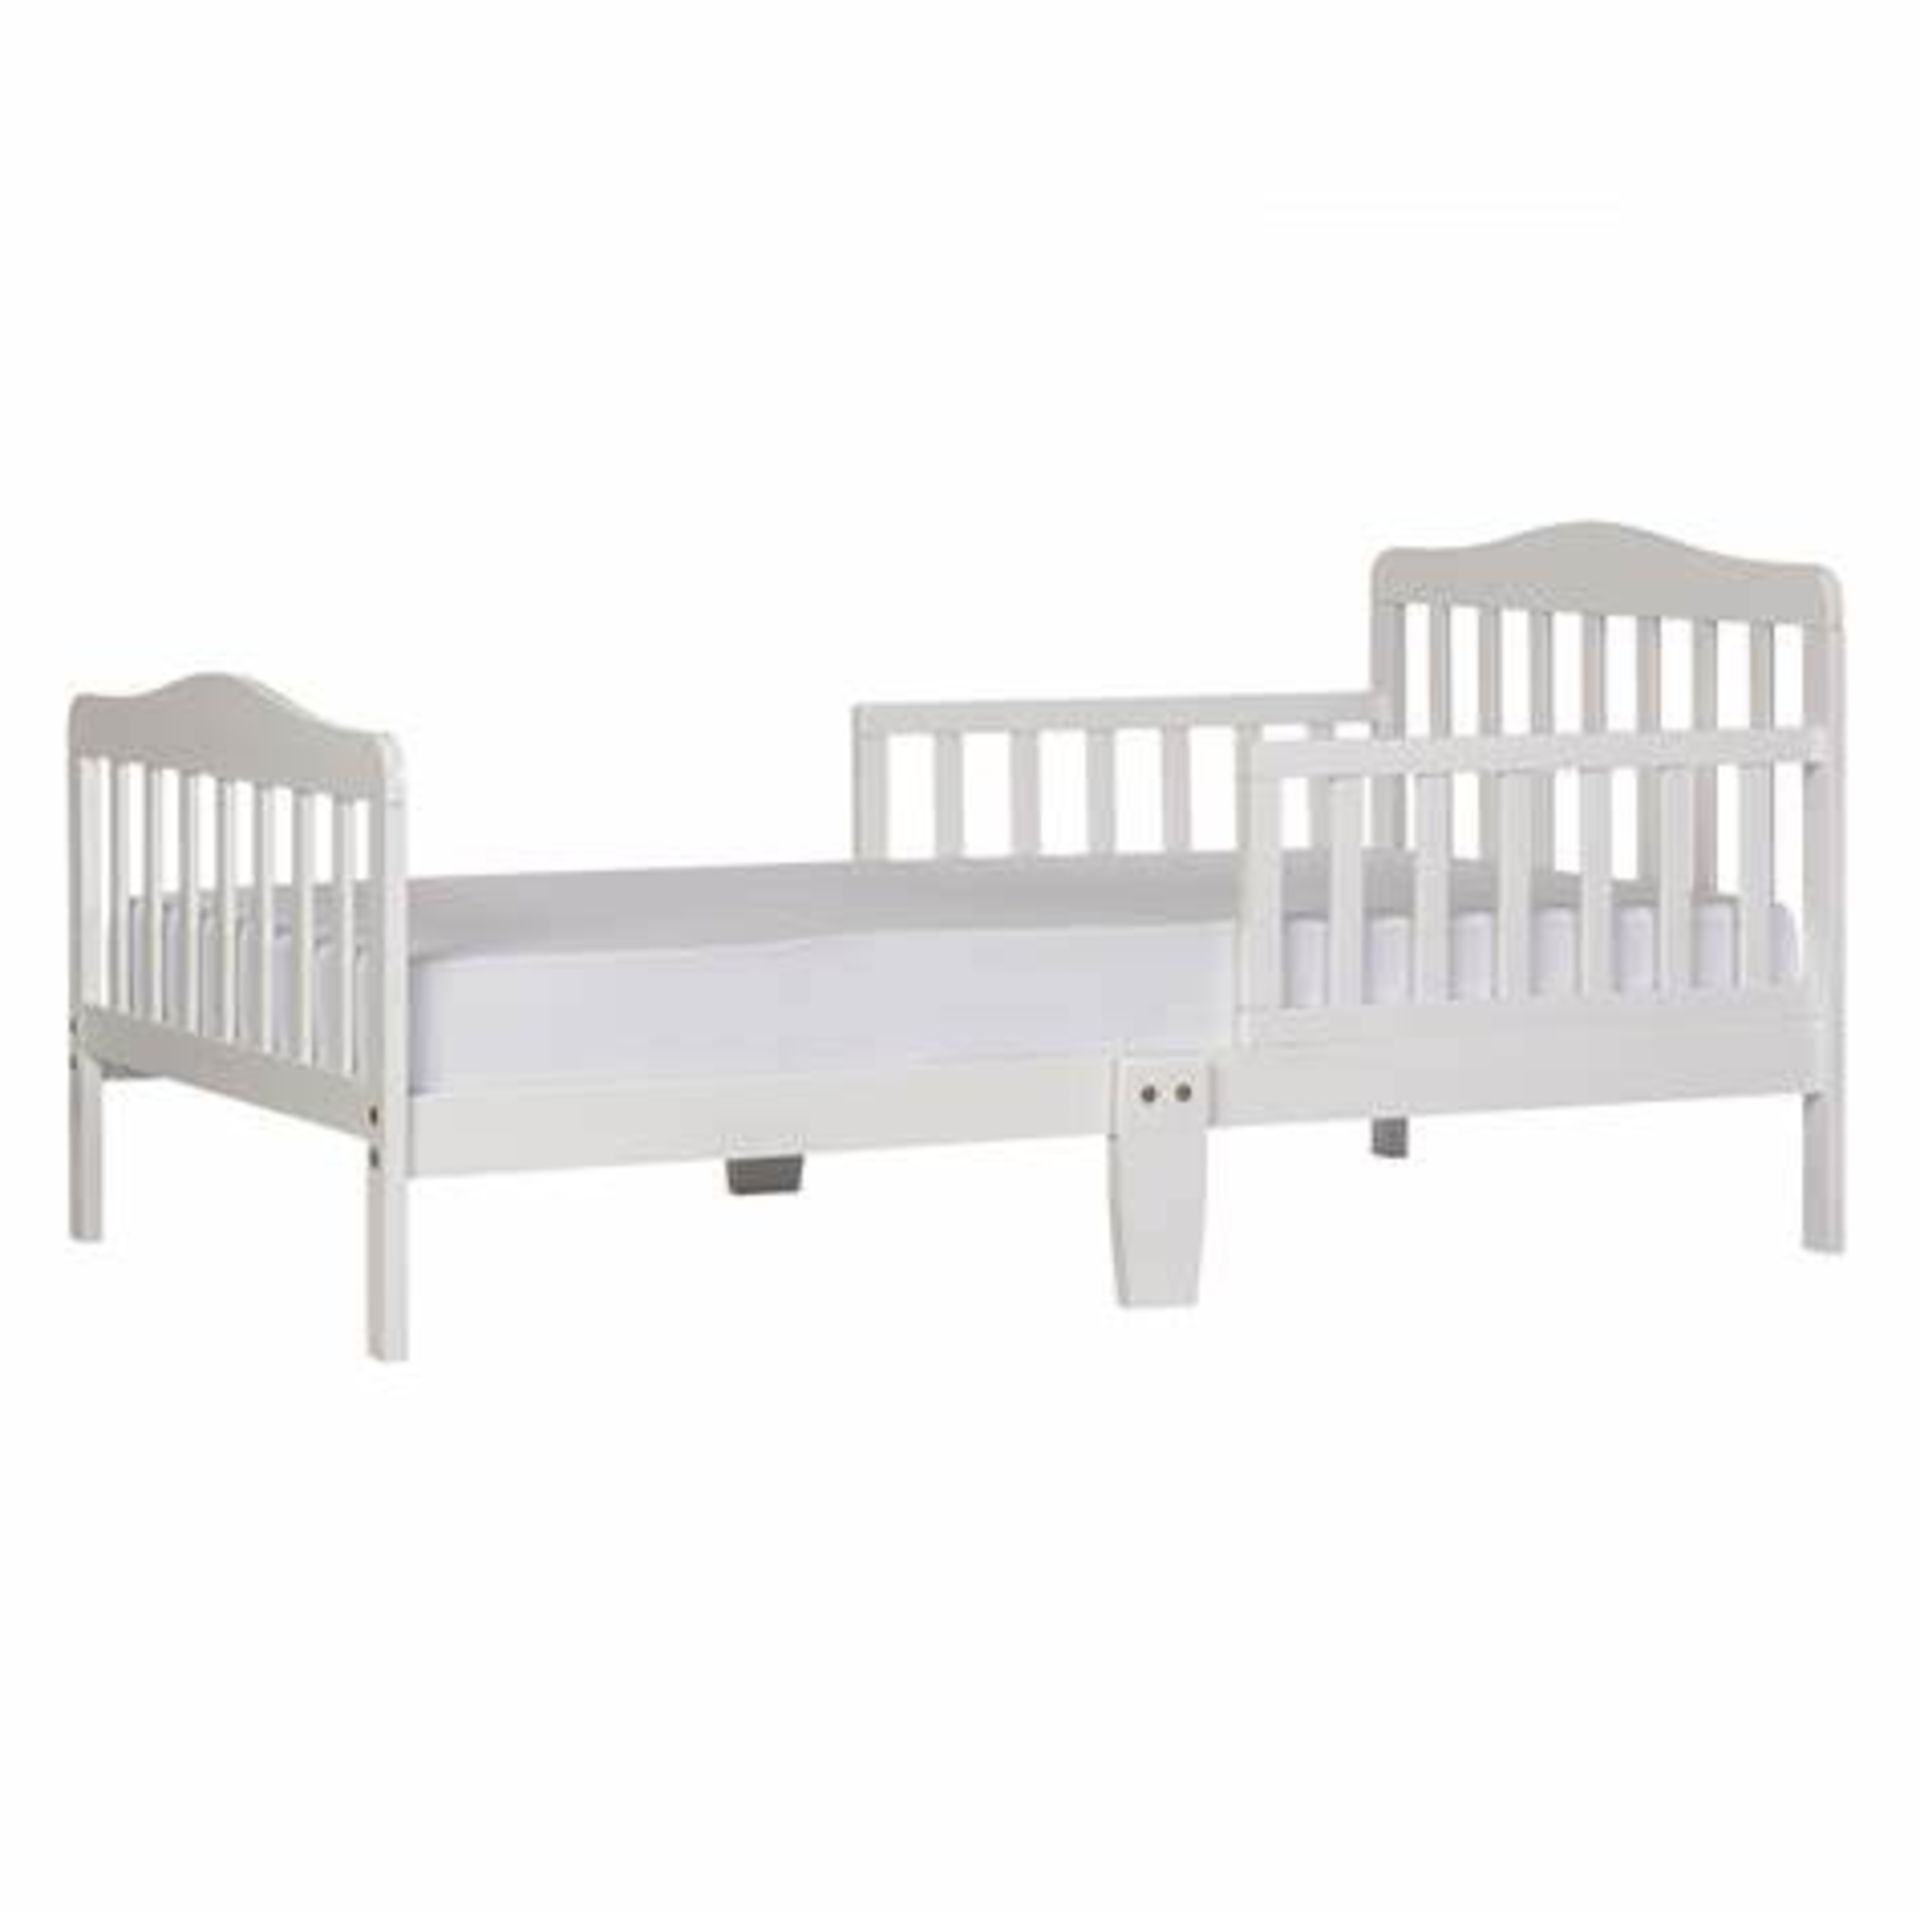 20 X Brand New Dream on Me Classic Toddler BedS. Product dimensionS - 144.8L x 71.1W x 76.2H CM - Image 2 of 4